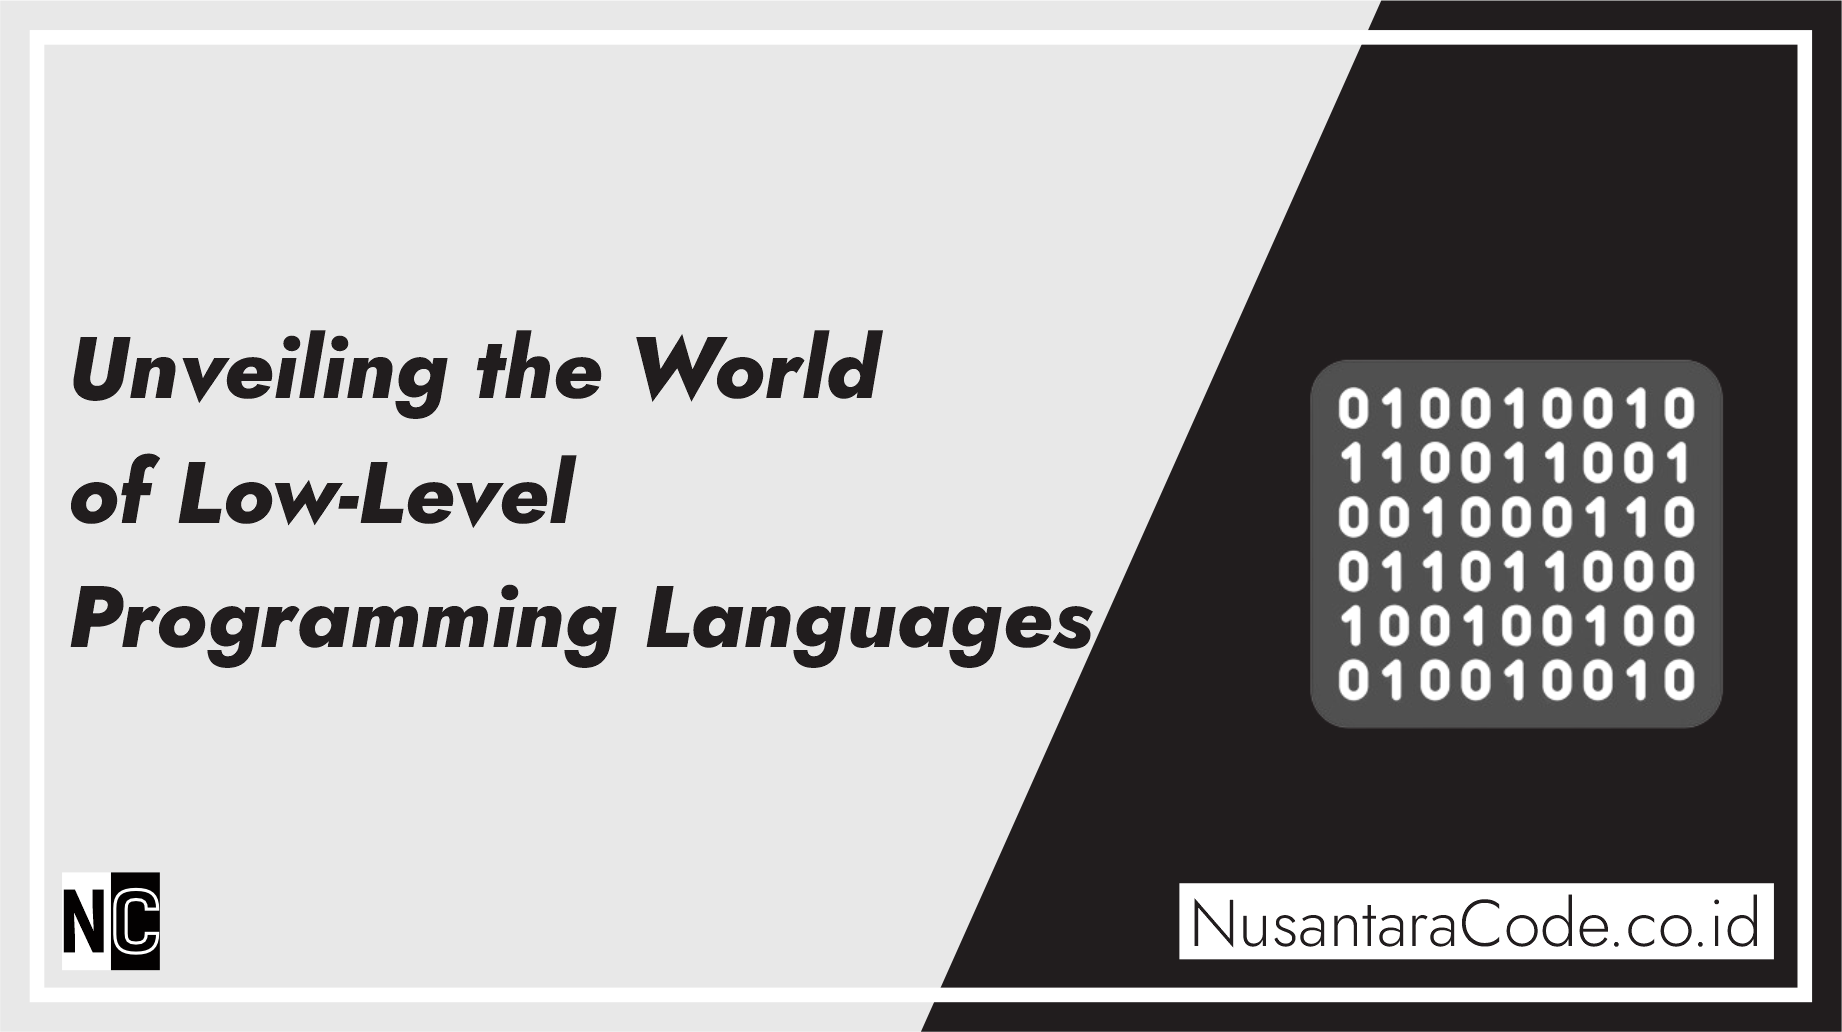 Unveiling the World of Low-Level Programming Languages